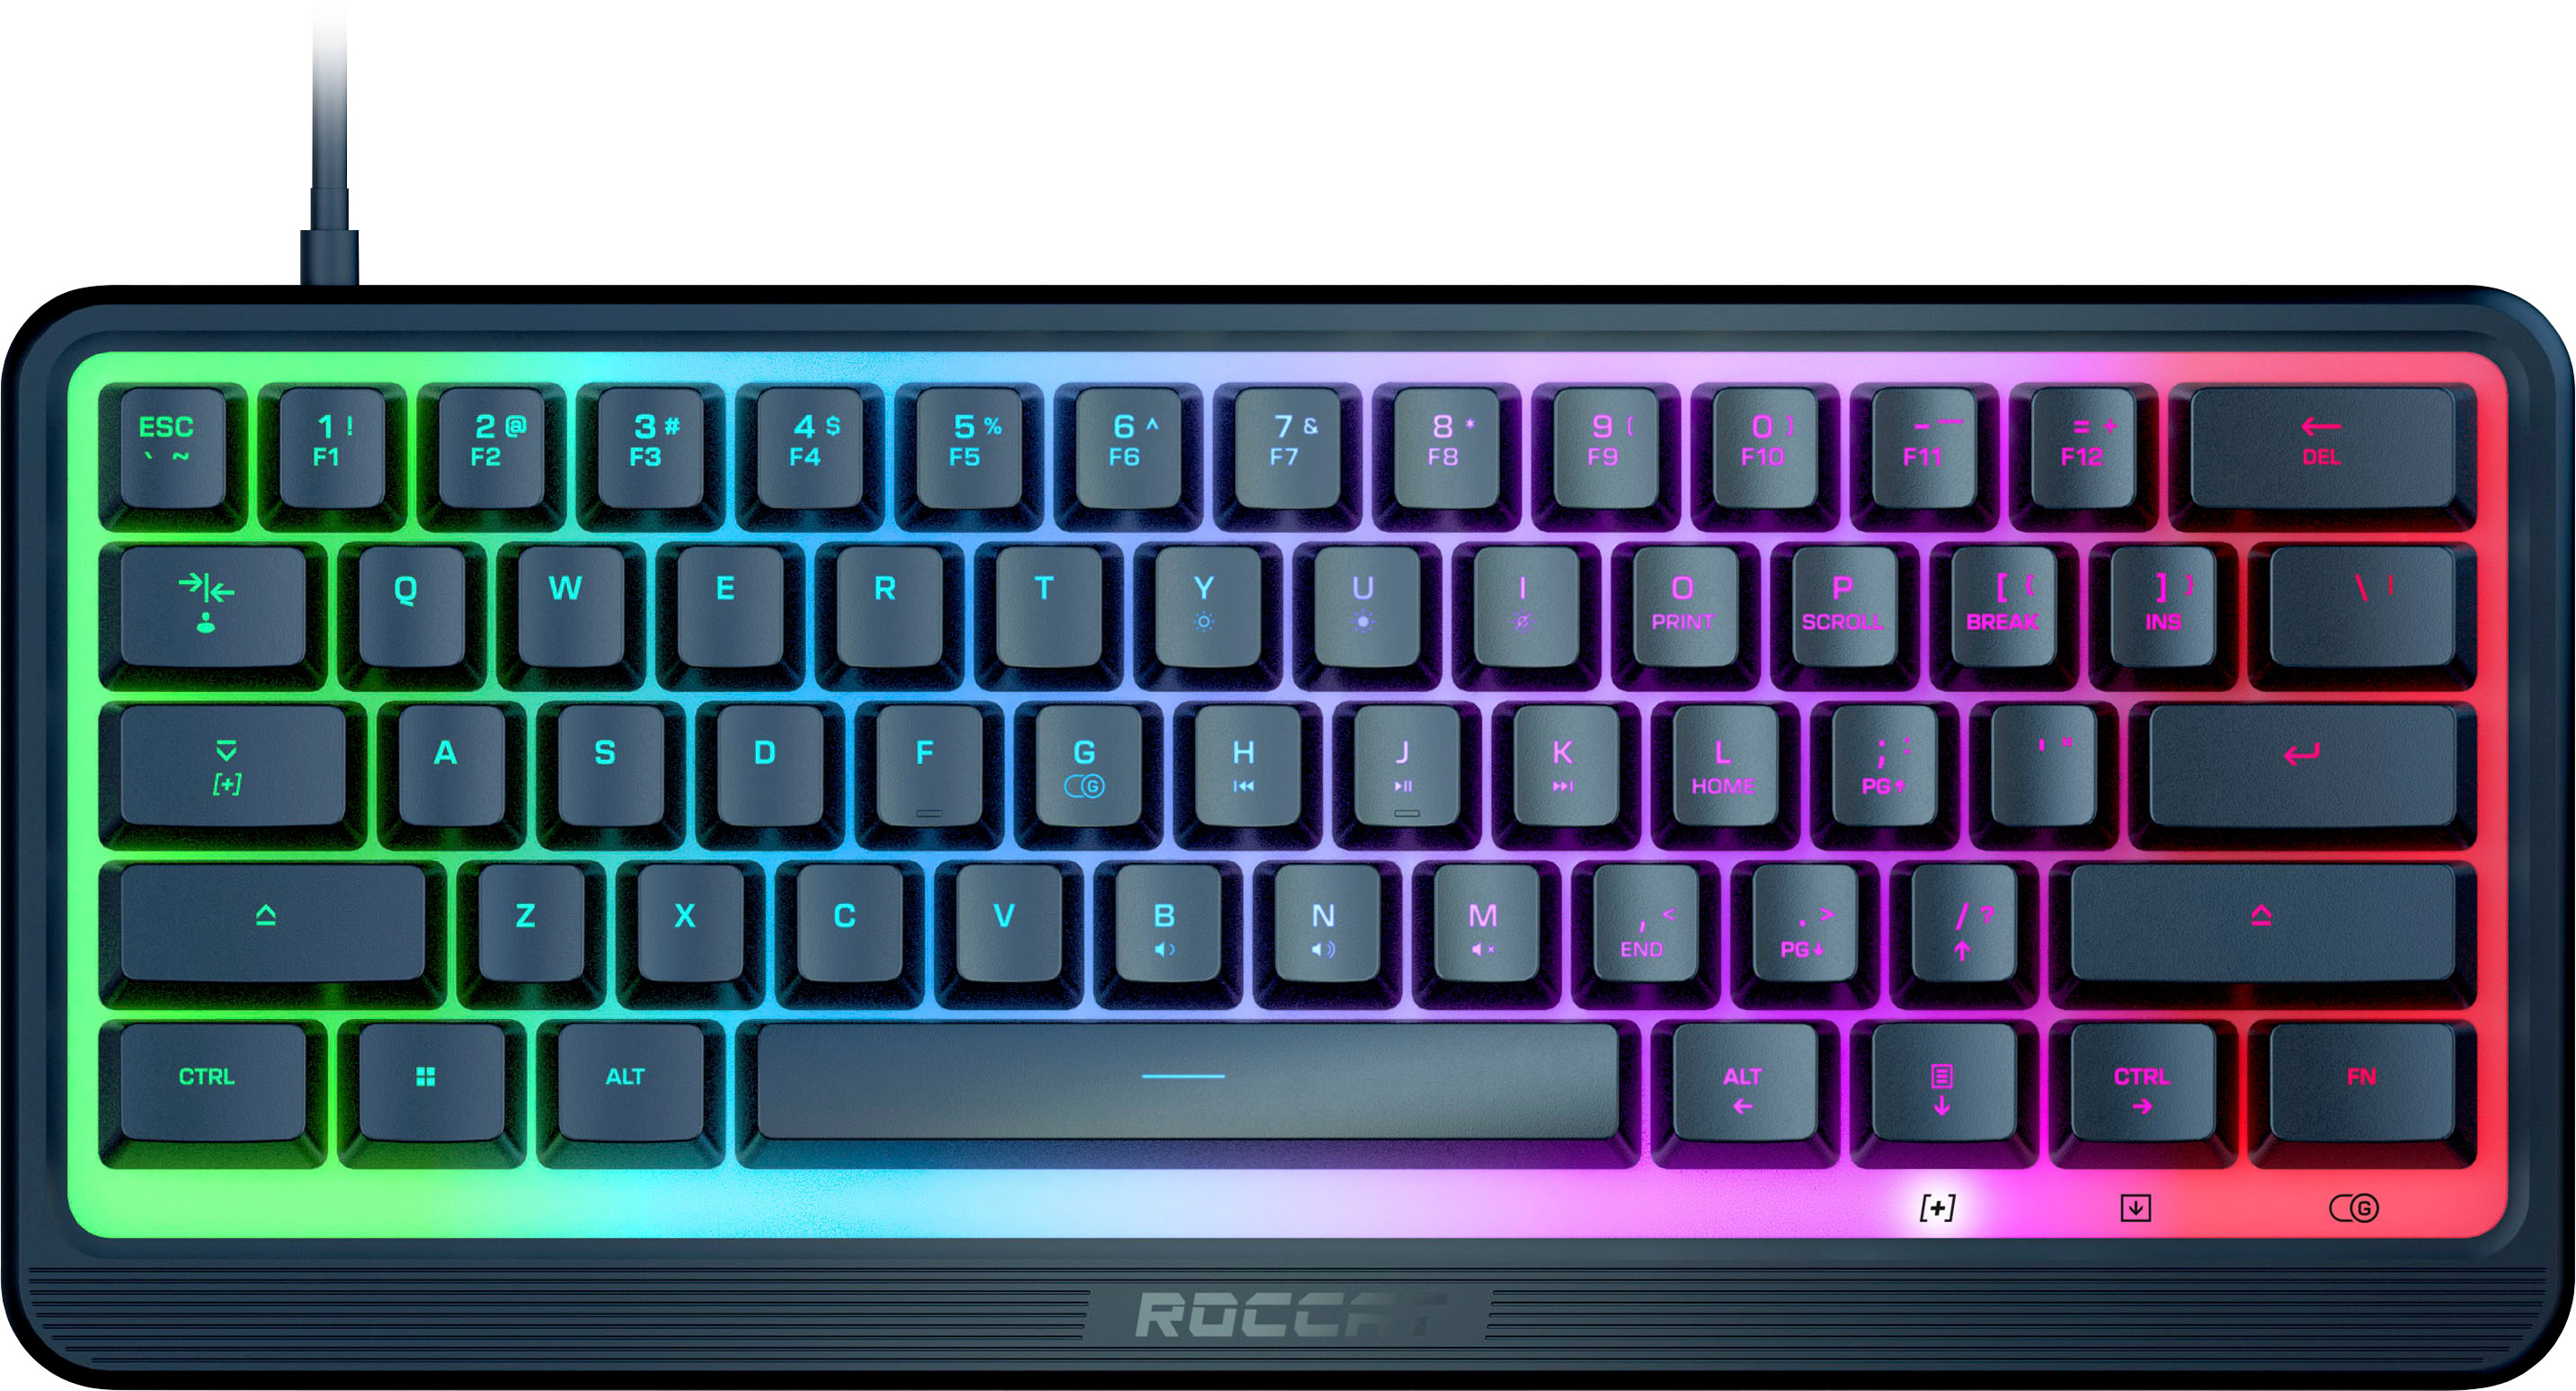 ROCCAT Magma Silent Membrane RGB Gaming Keyboard – Gear Up! Store